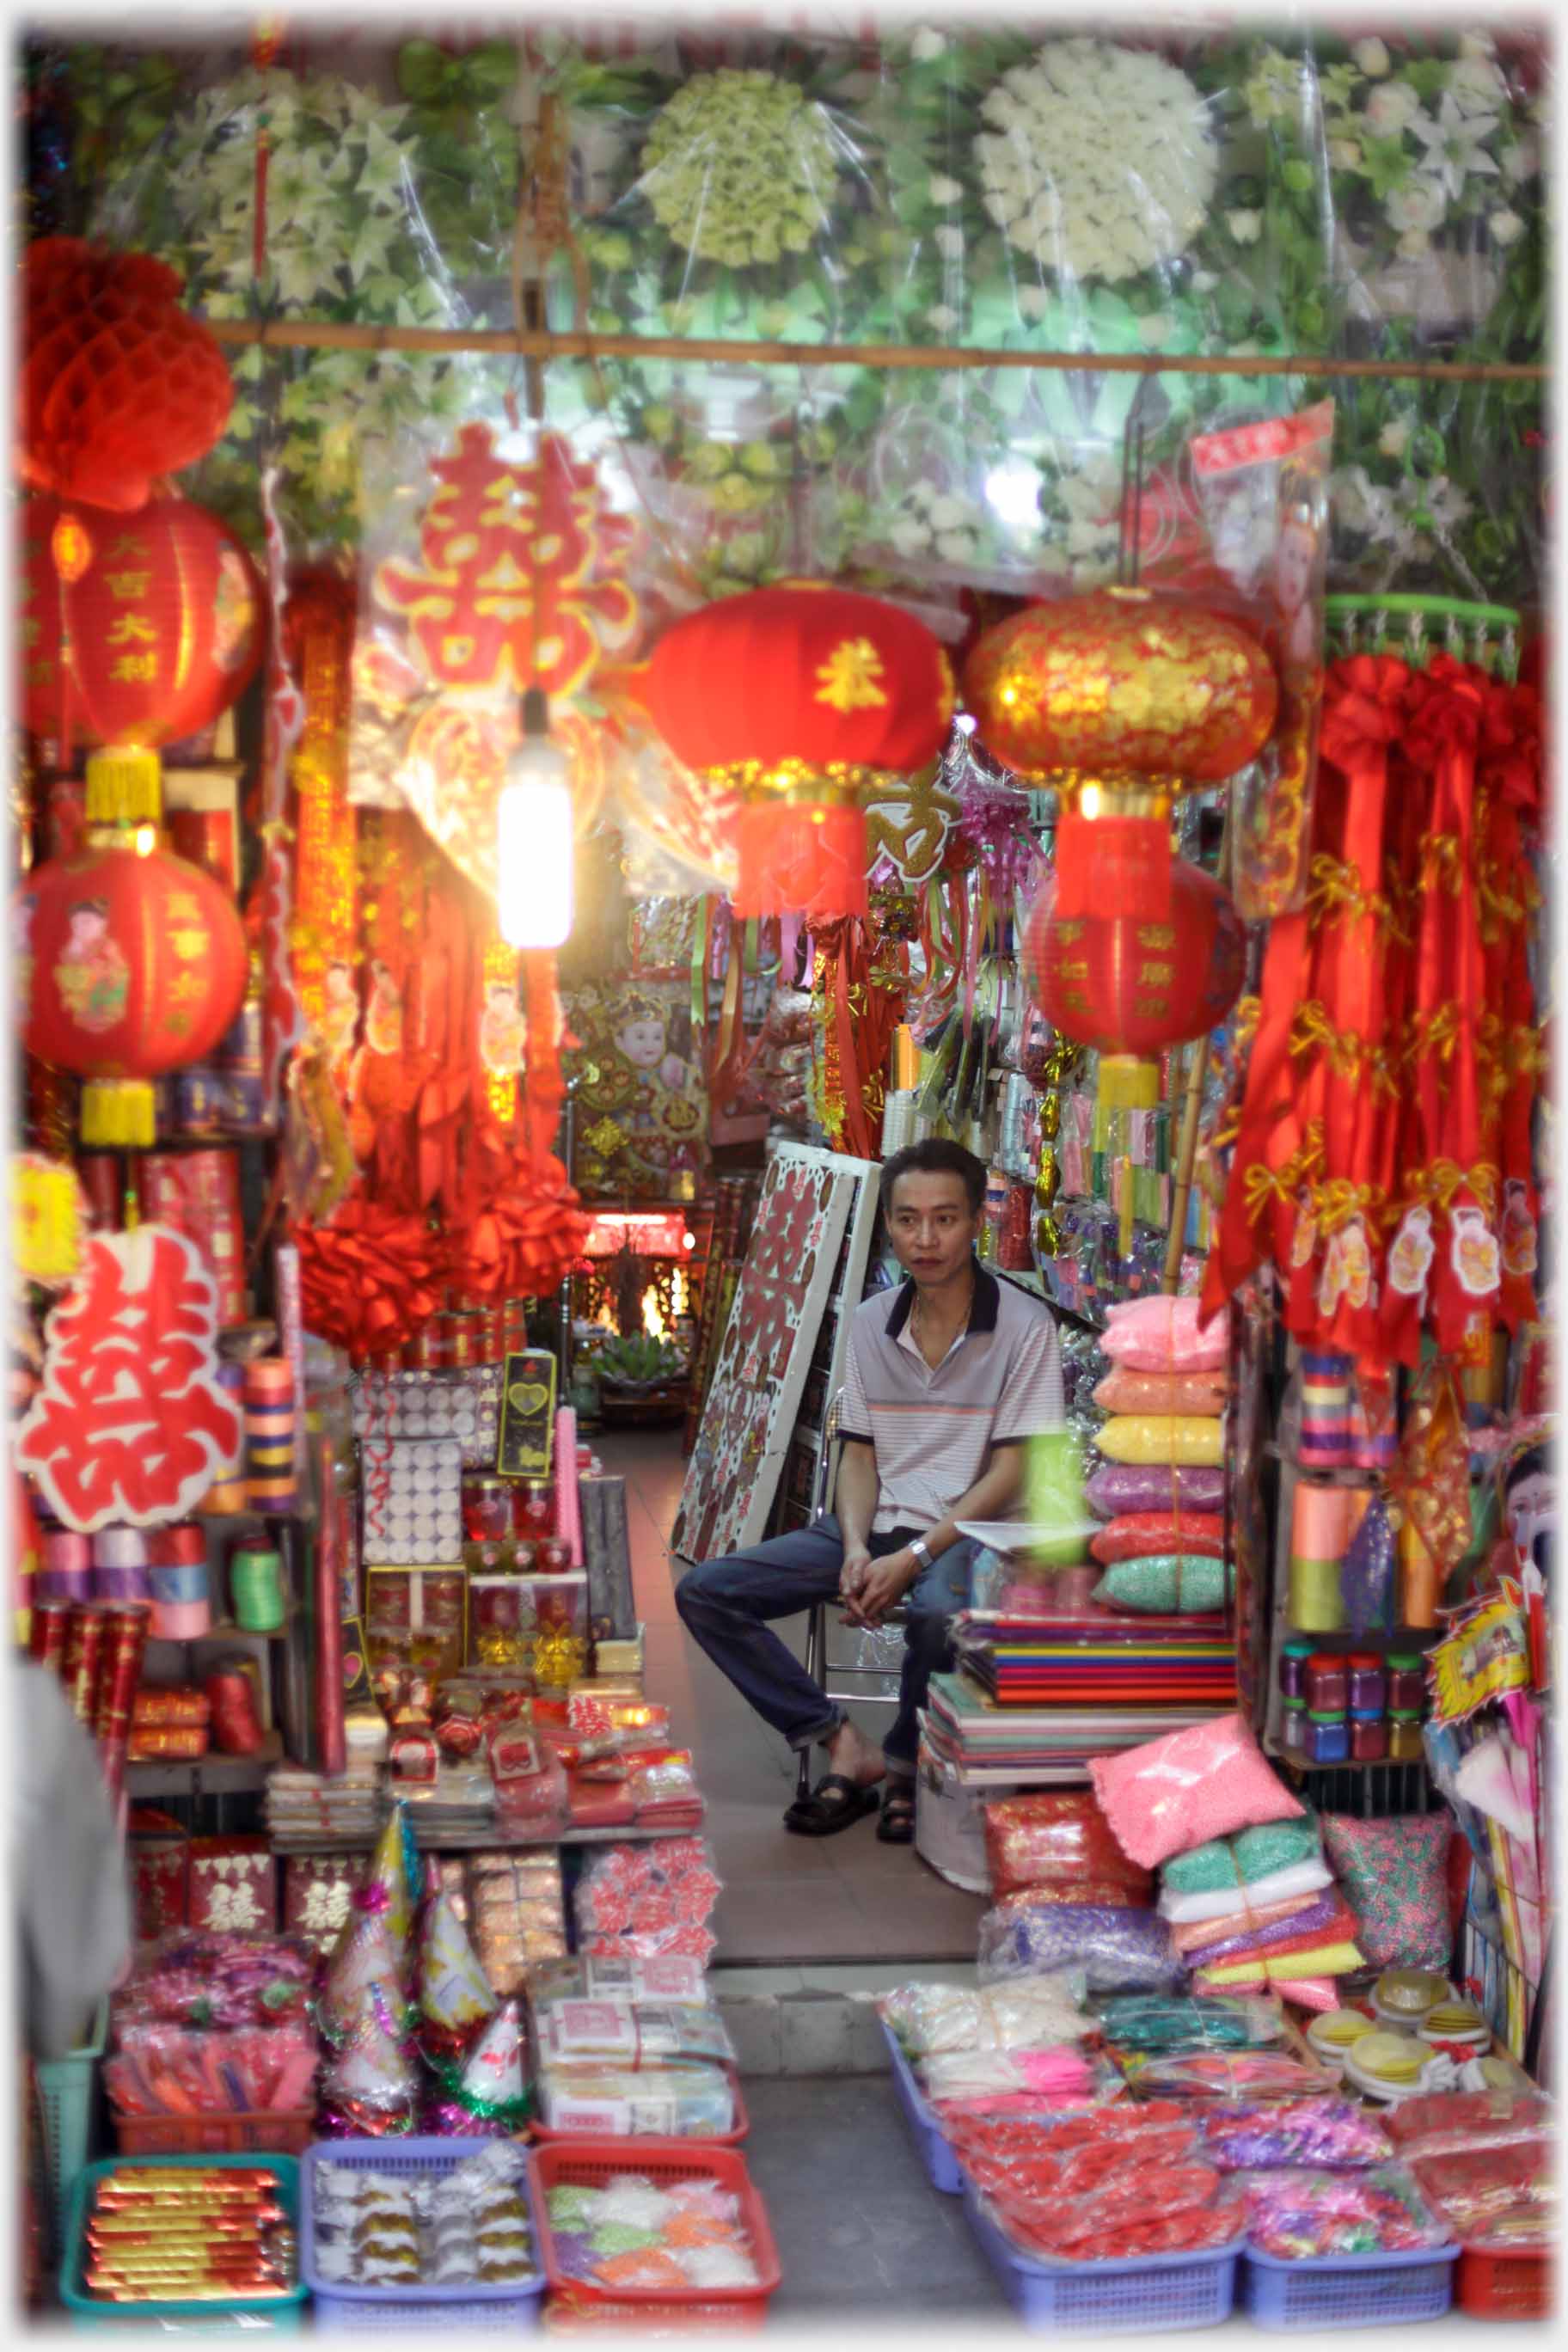 Man sitting totally surrounded by red lamps and decorations.